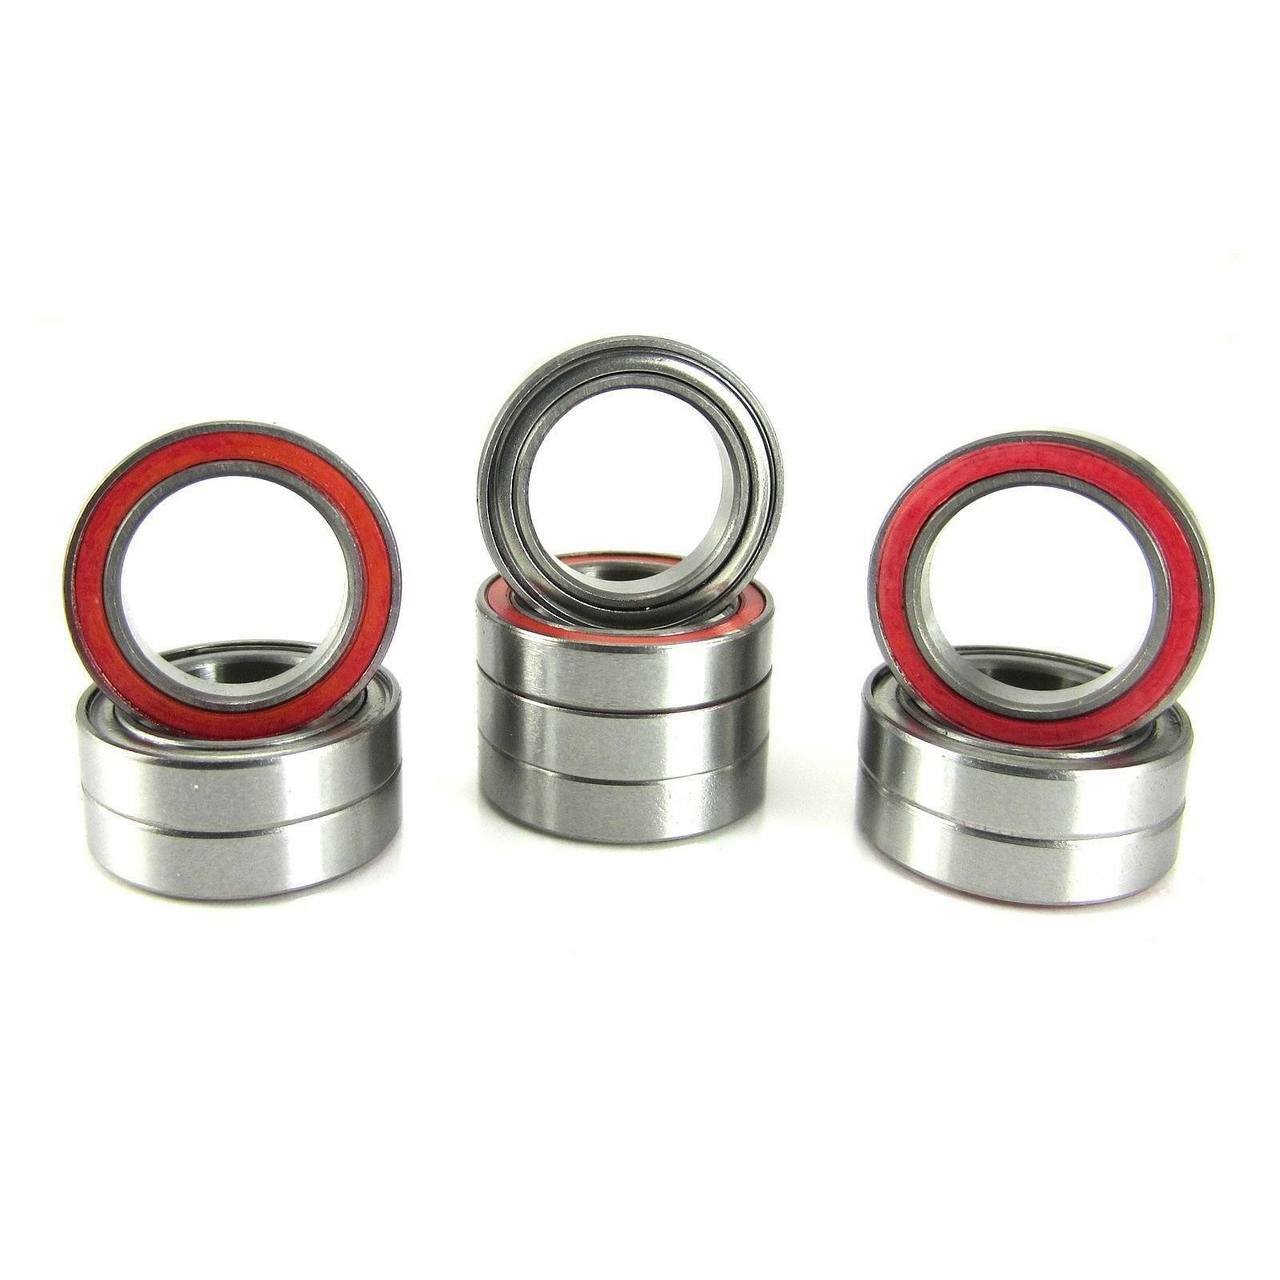 6701-RZ 12x18x4mm Precision High Speed RC Car Ball Bearing, Chrome Steel (GCr15) with 1 Red Rubber Seal & 1 Metal Shield